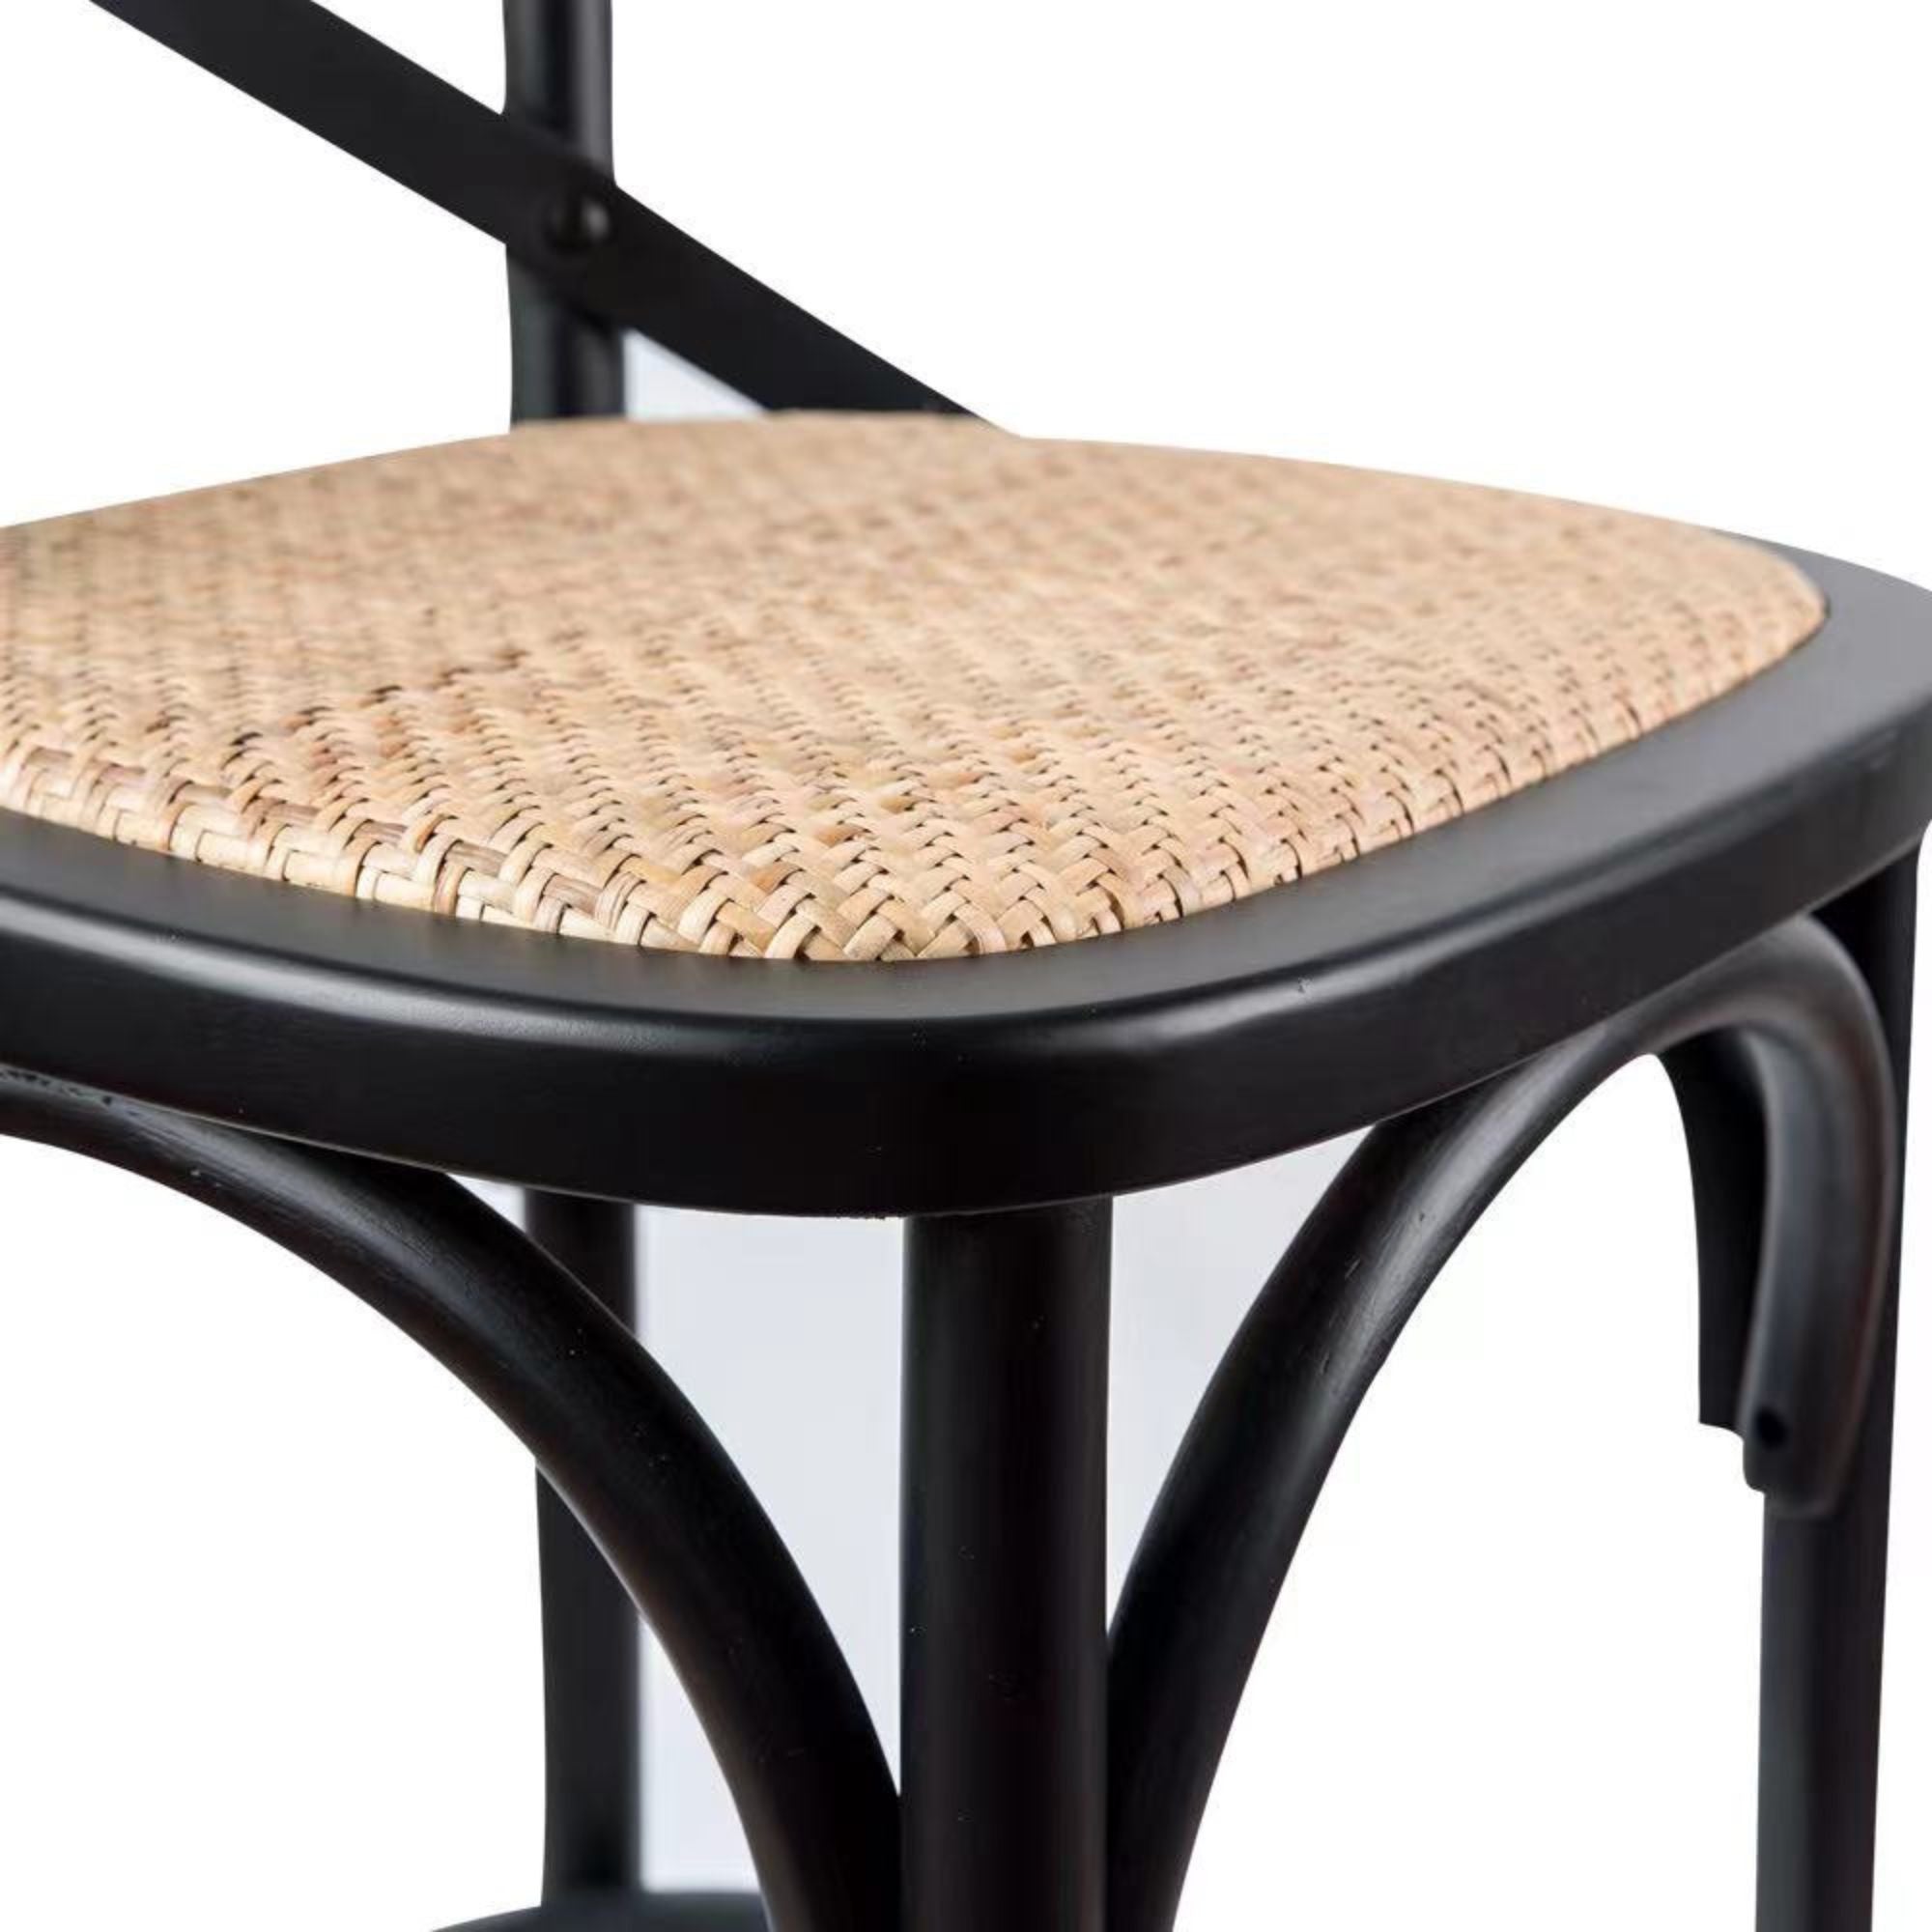 Aster Crossback Bar Stools Dining Chair Solid Birch Timber Rattan Seat - Black Deals499